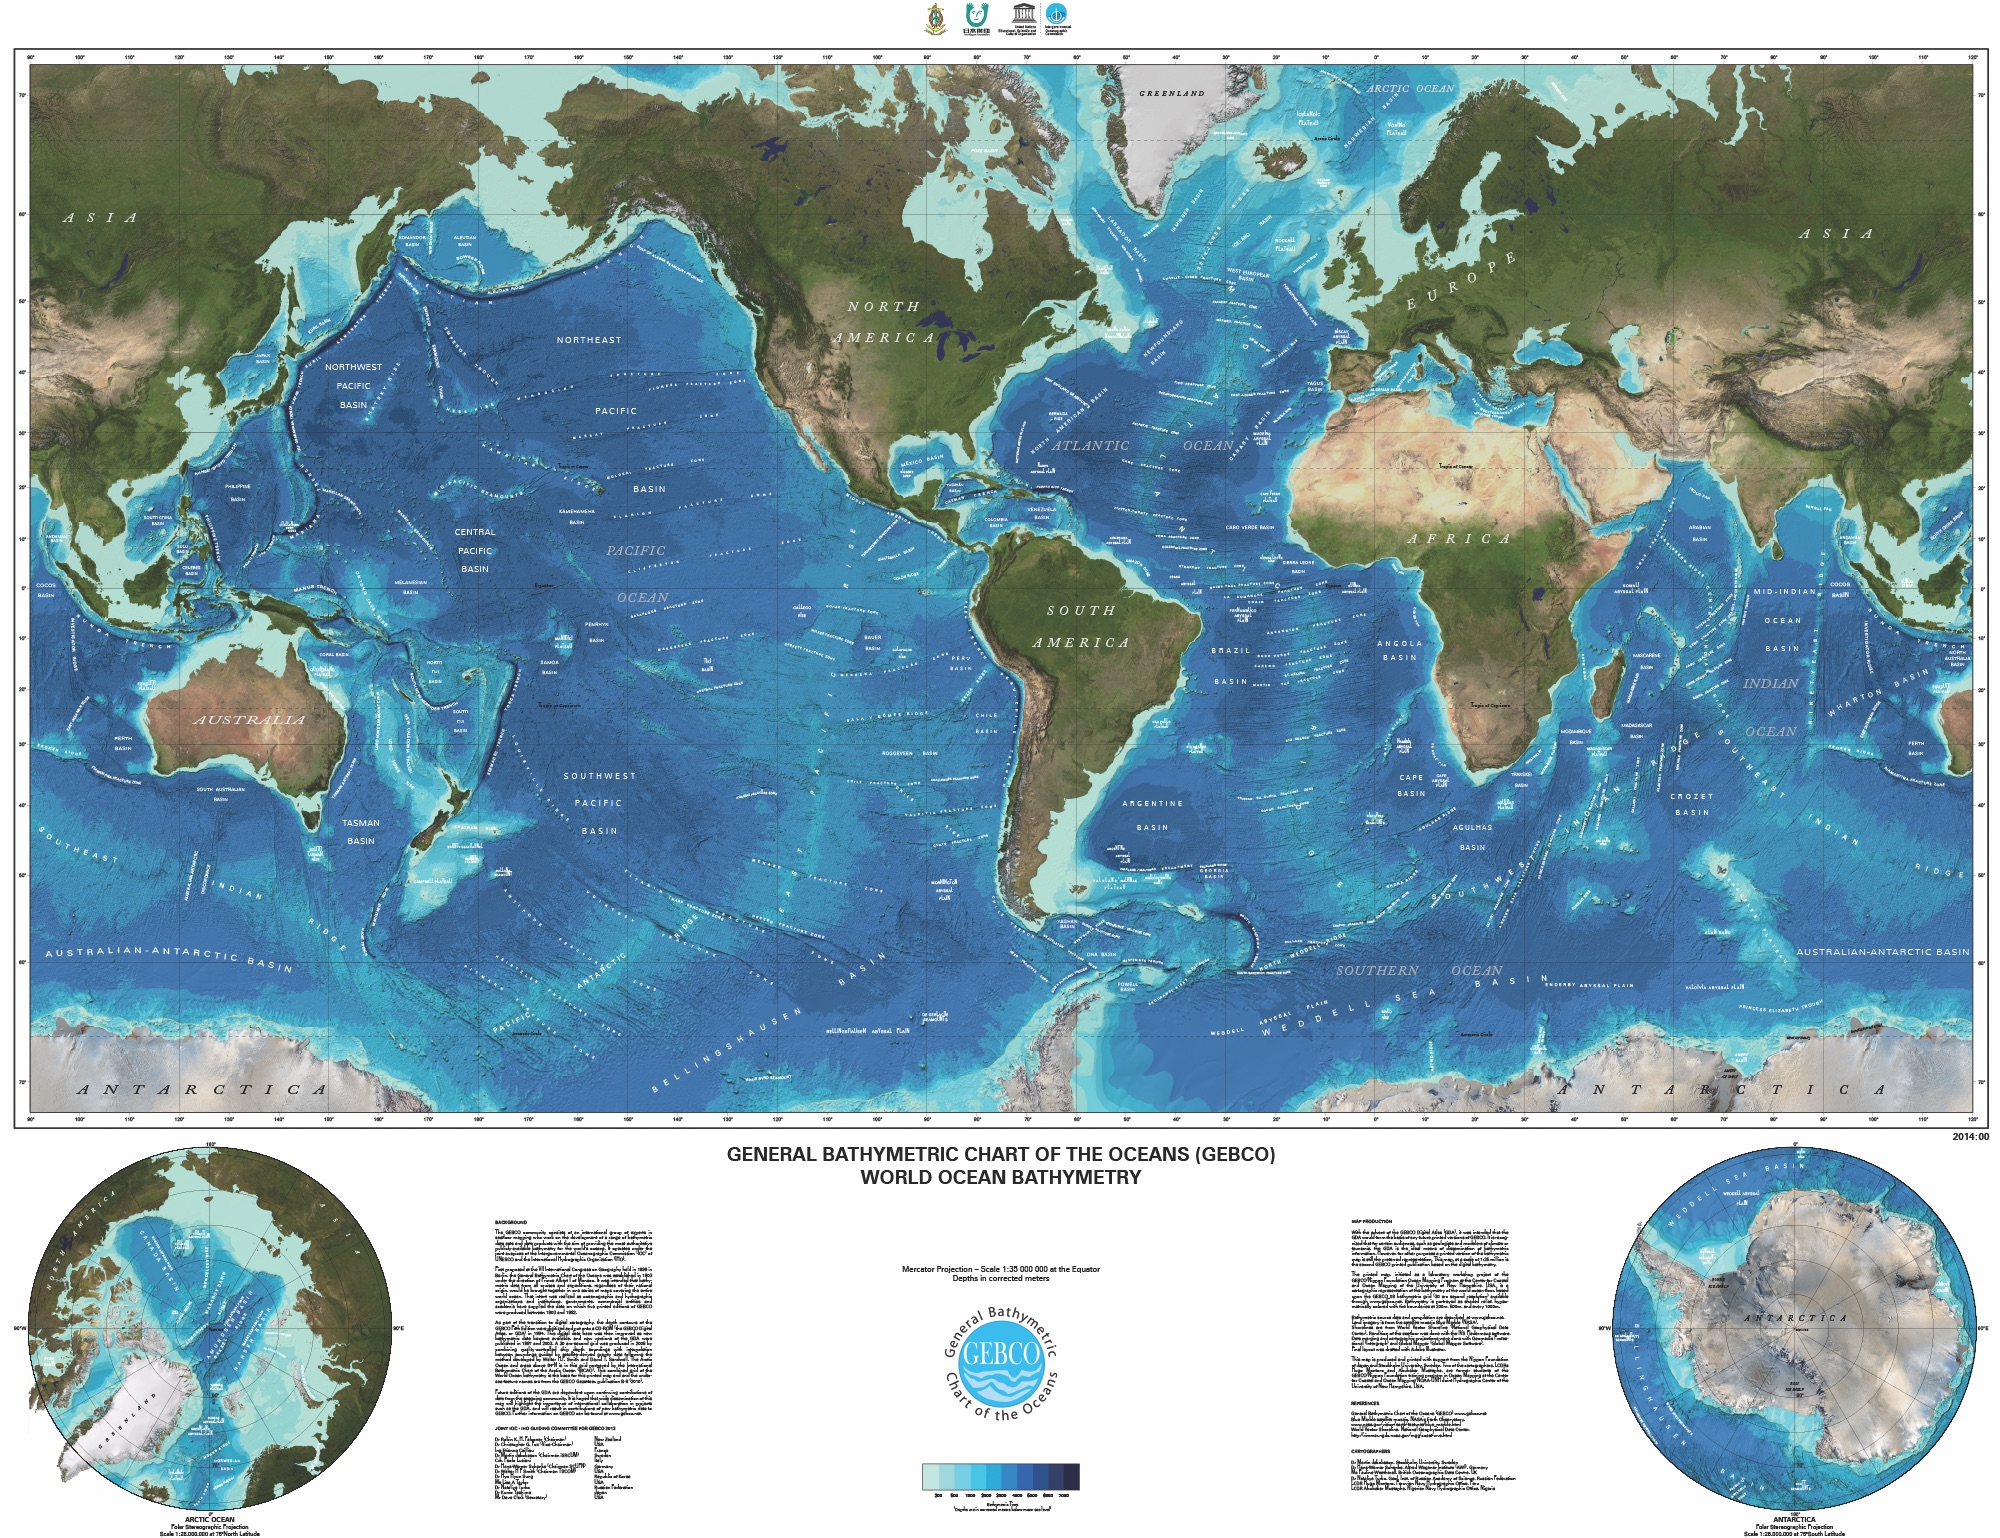 New global initiatives announced for mapping the entire ocean floor